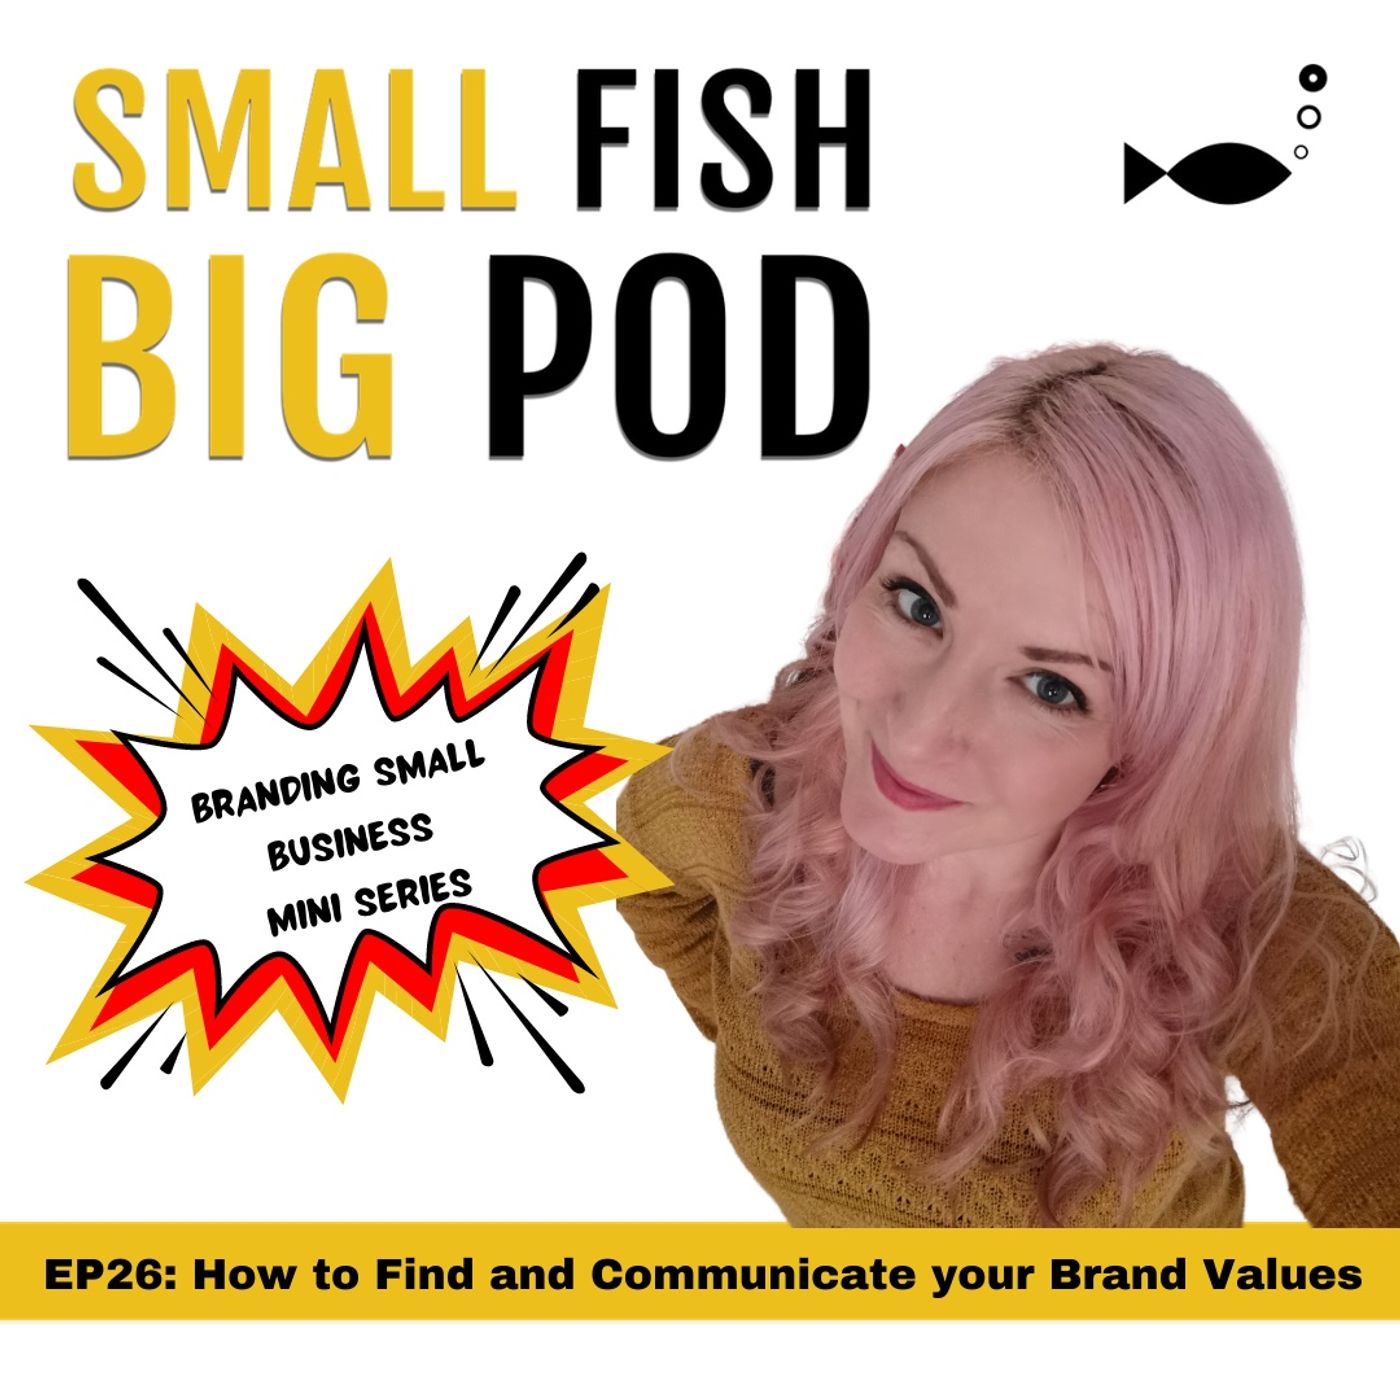 EP26: How to Find and Communicate your Brand Values